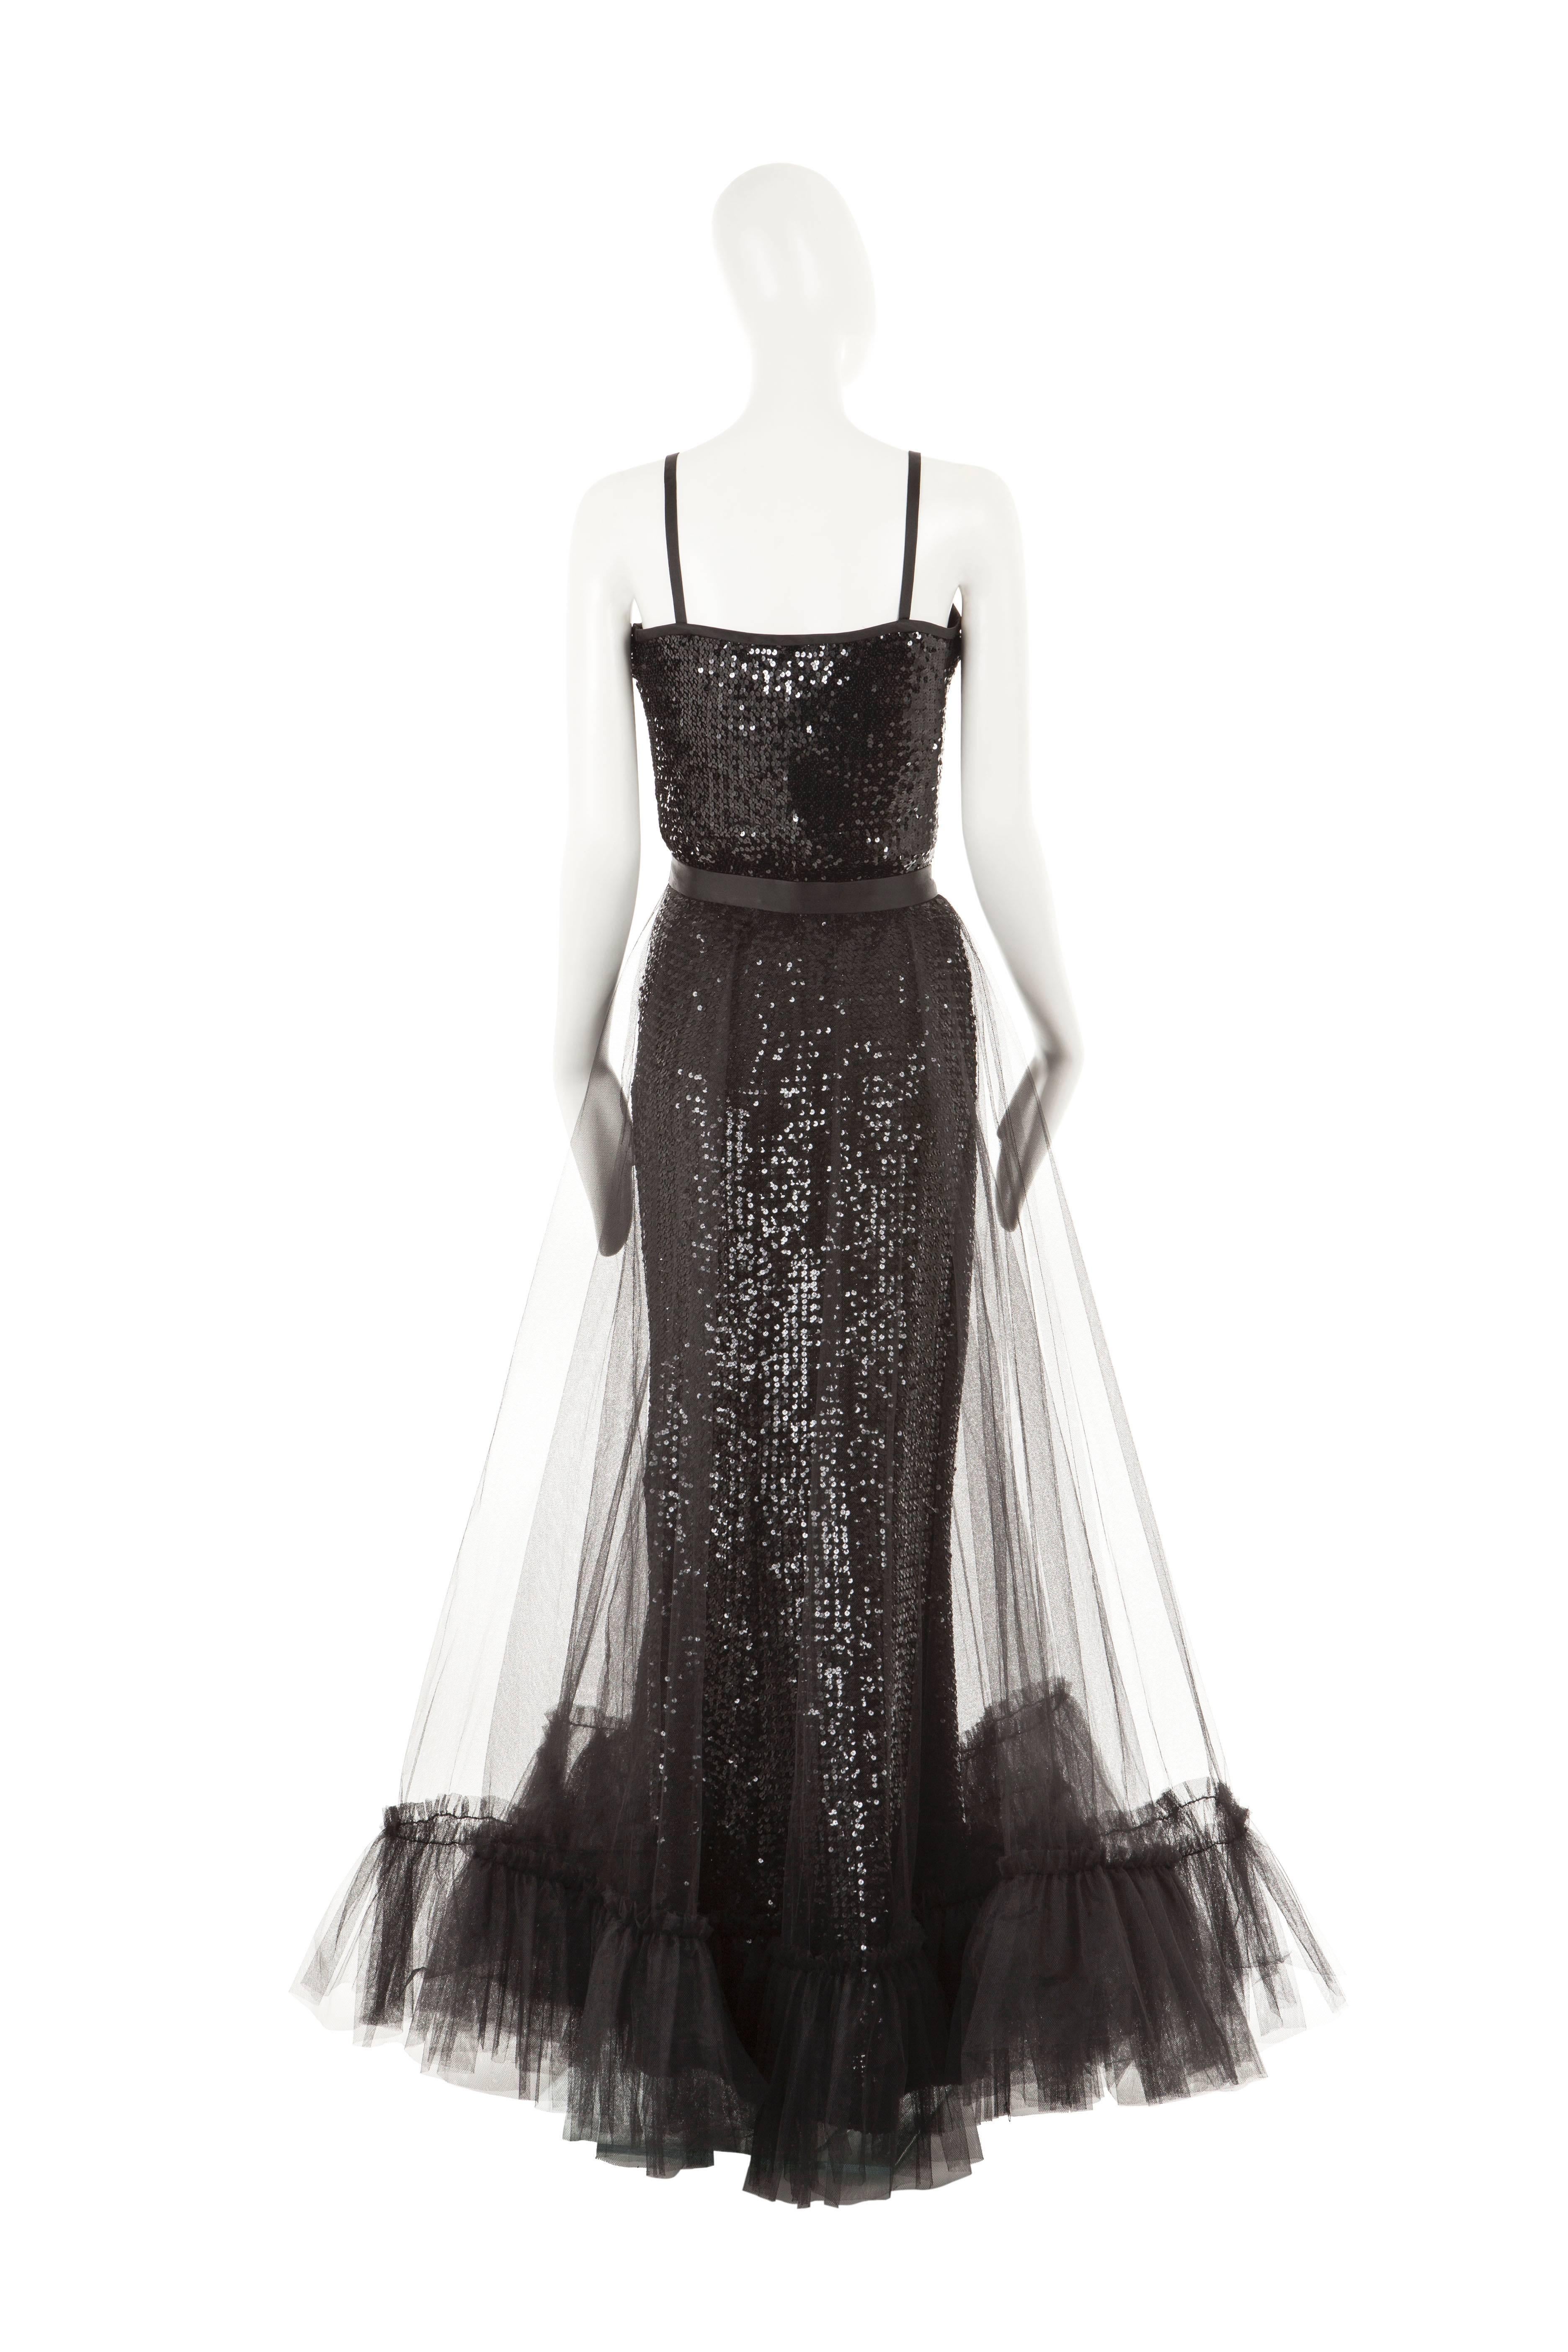 Yves Saint Laurent sequin and tulle gown, 1981 For Sale 1